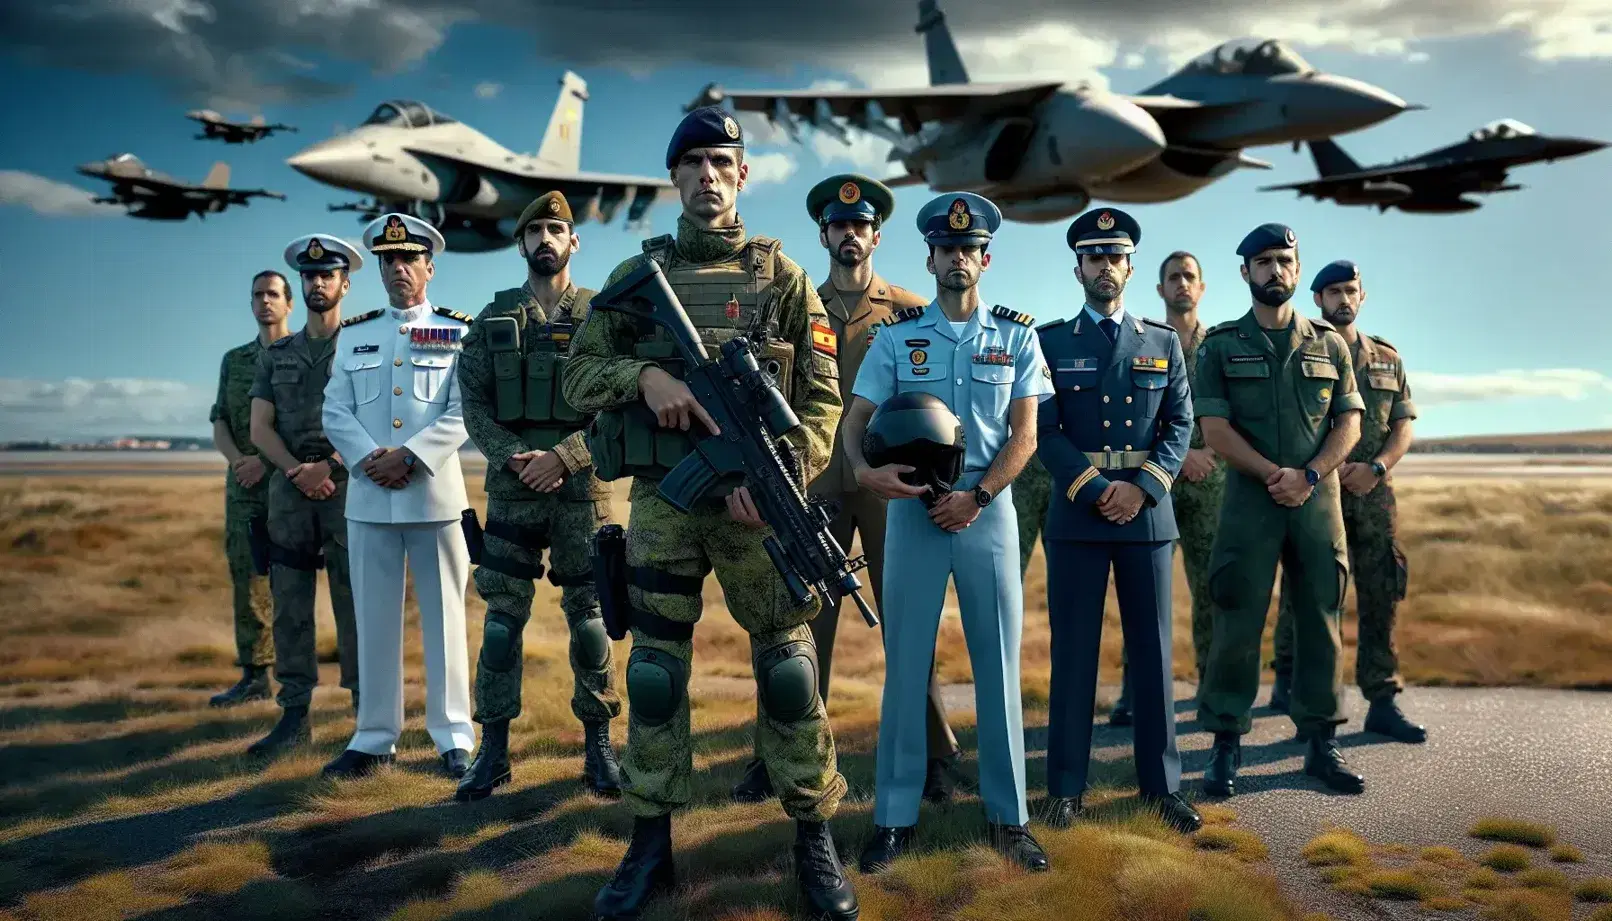 Spanish military and security forces in uniform stand in a semi-circle on a green field under a clear blue sky, showcasing inter-branch cooperation.